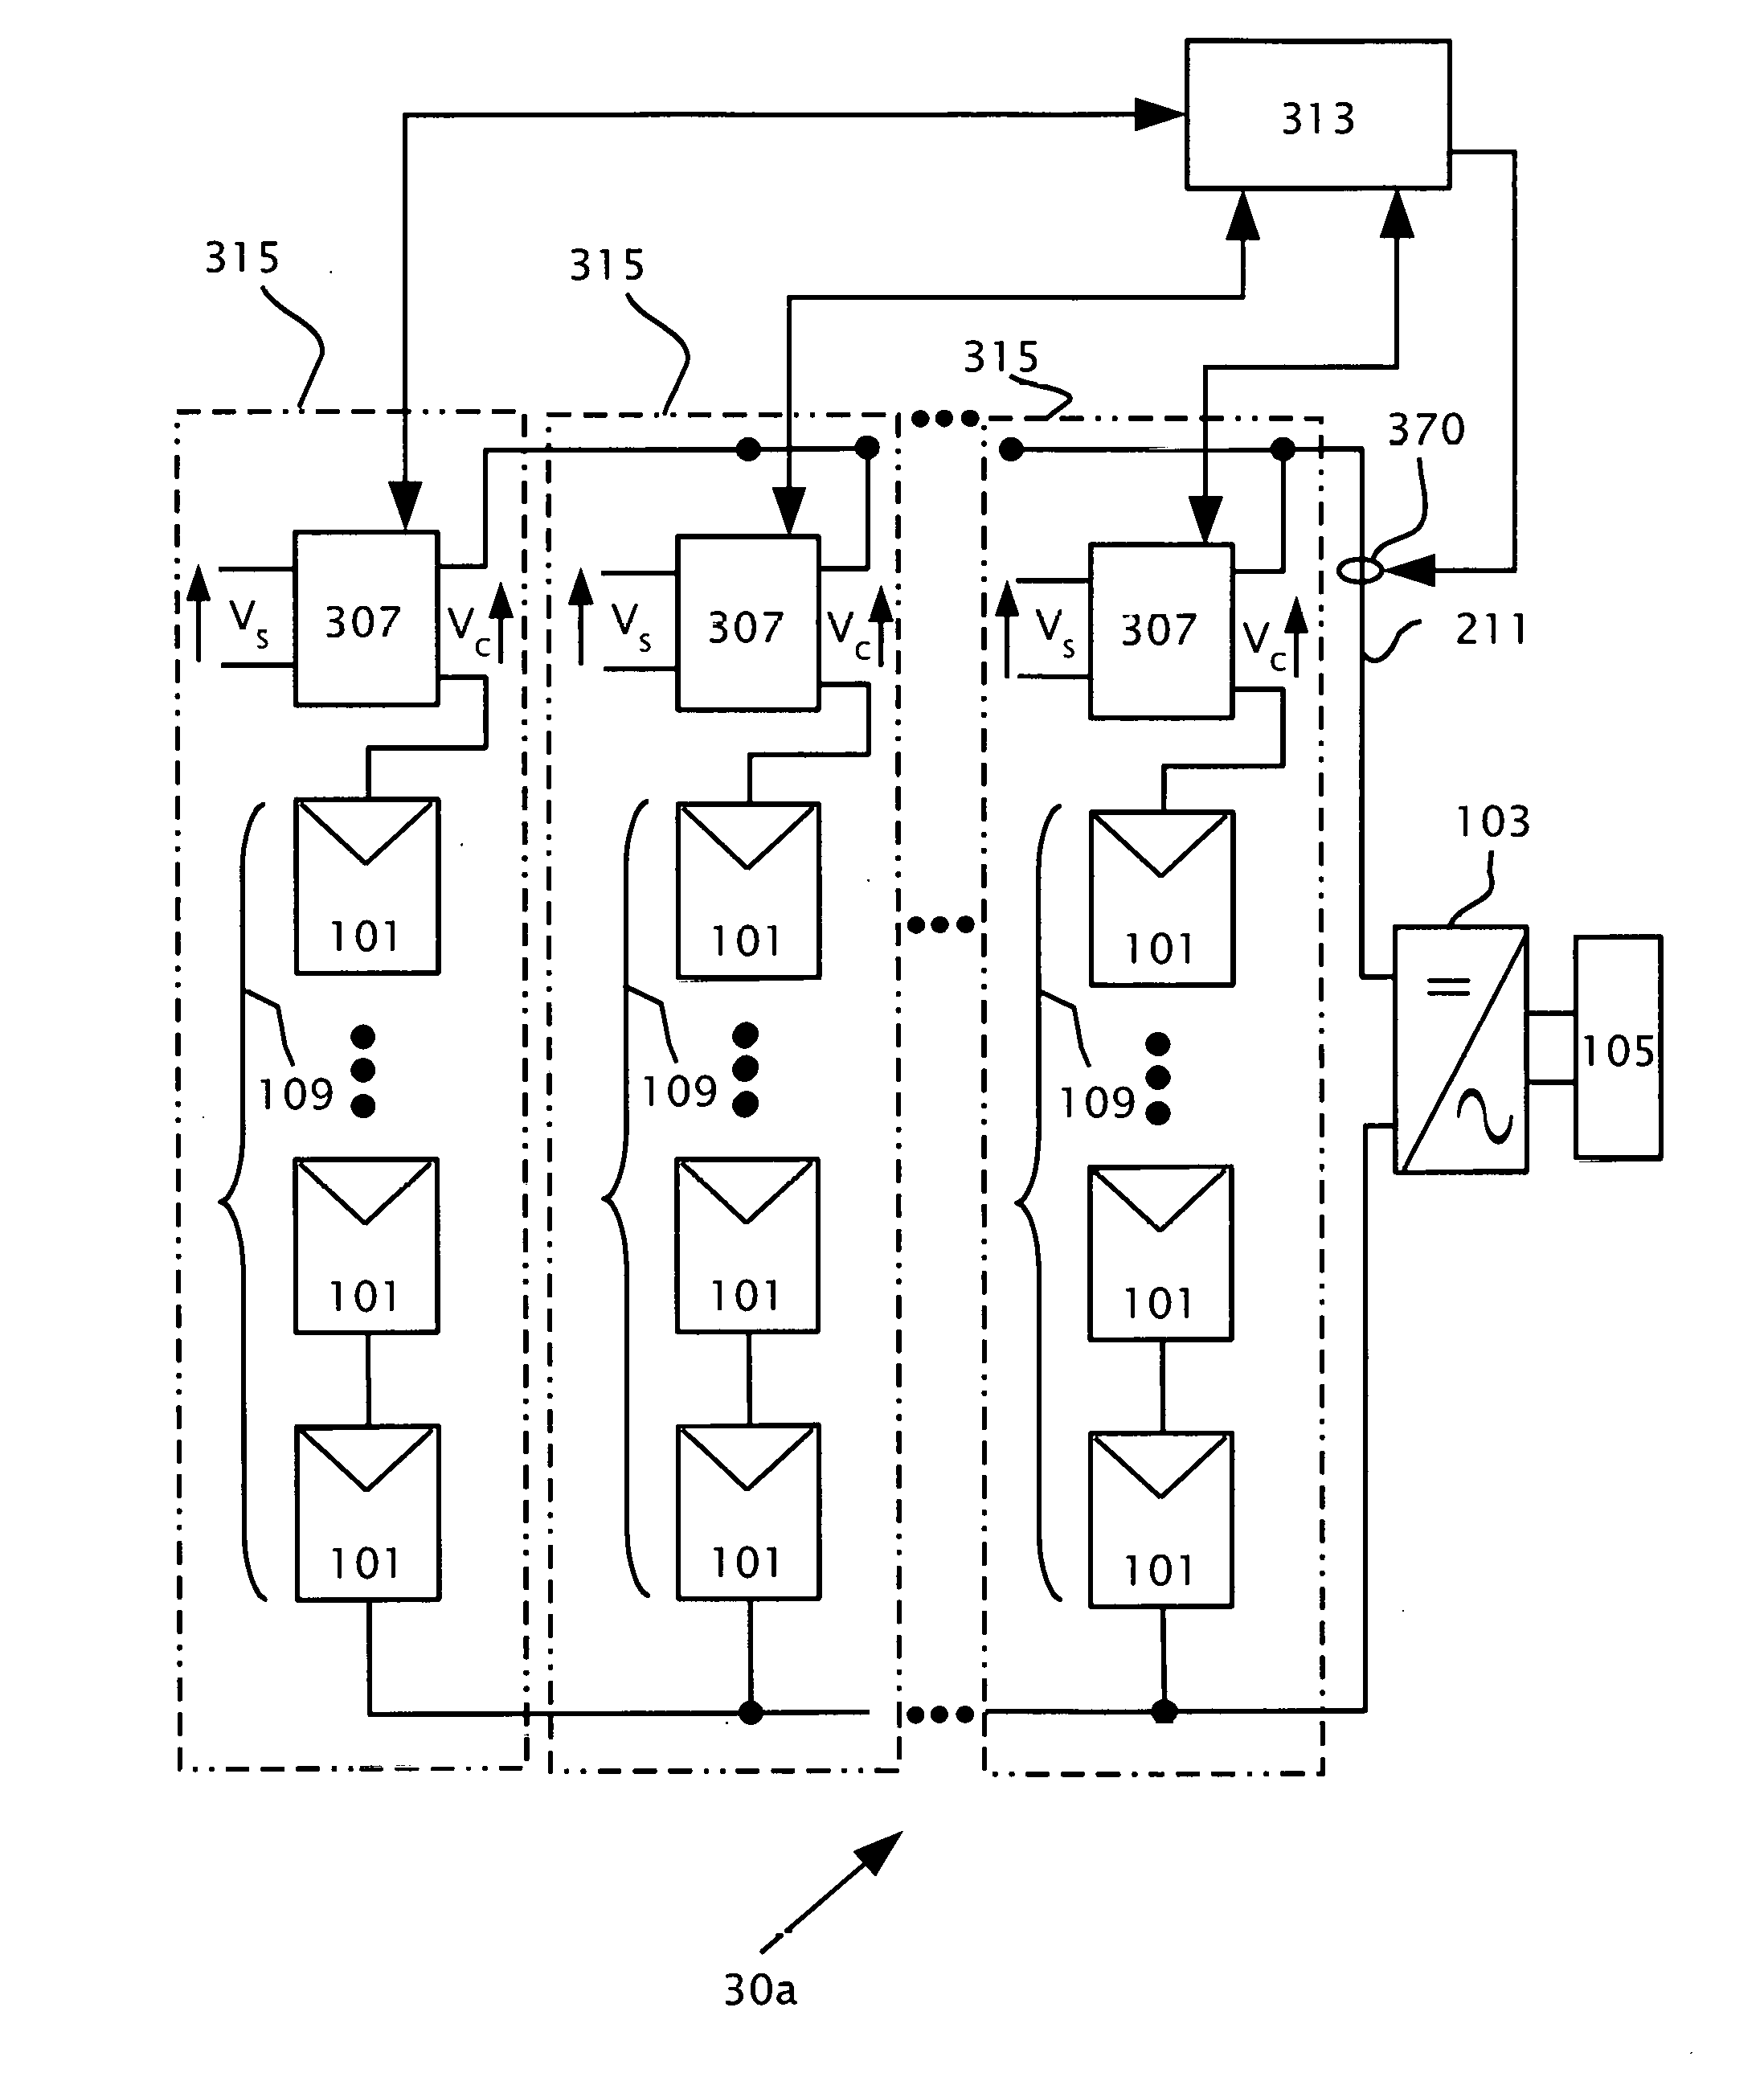 Maximized Power in a Photovoltaic Distributed Power System